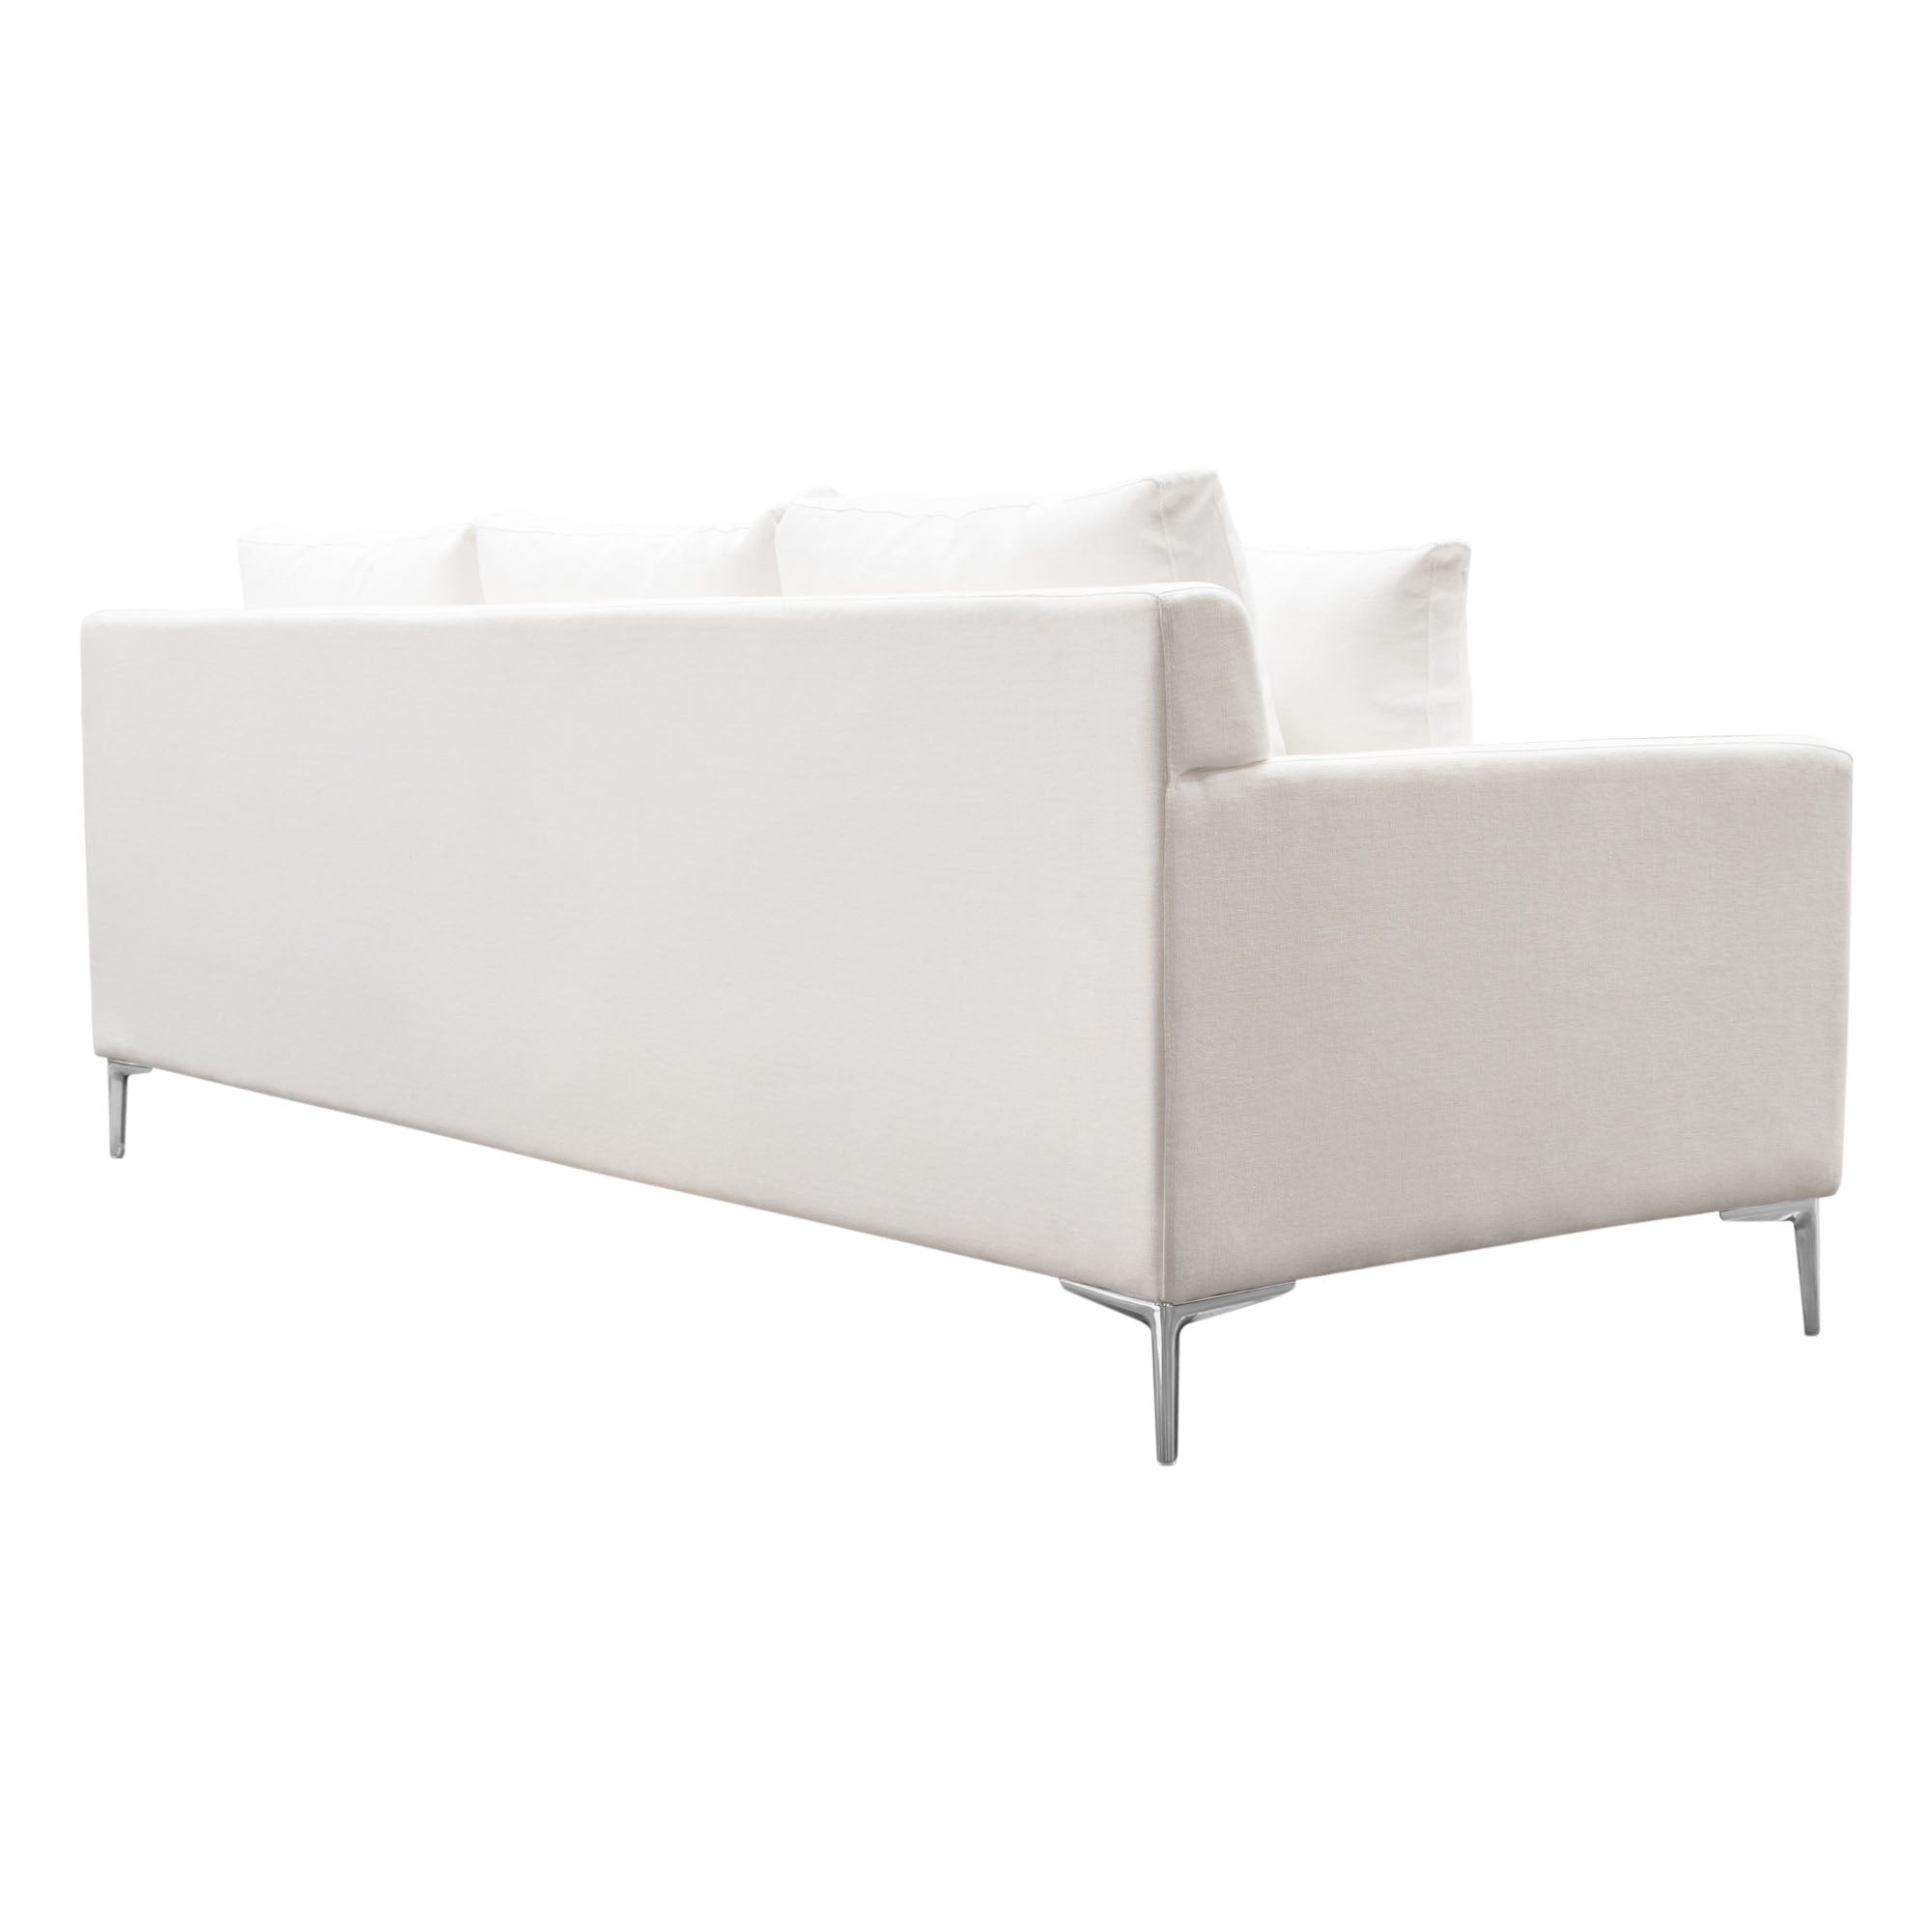 Diamond Sofa Seattle Loose Back Sofa in White Linen with Polished Silver Metal Leg